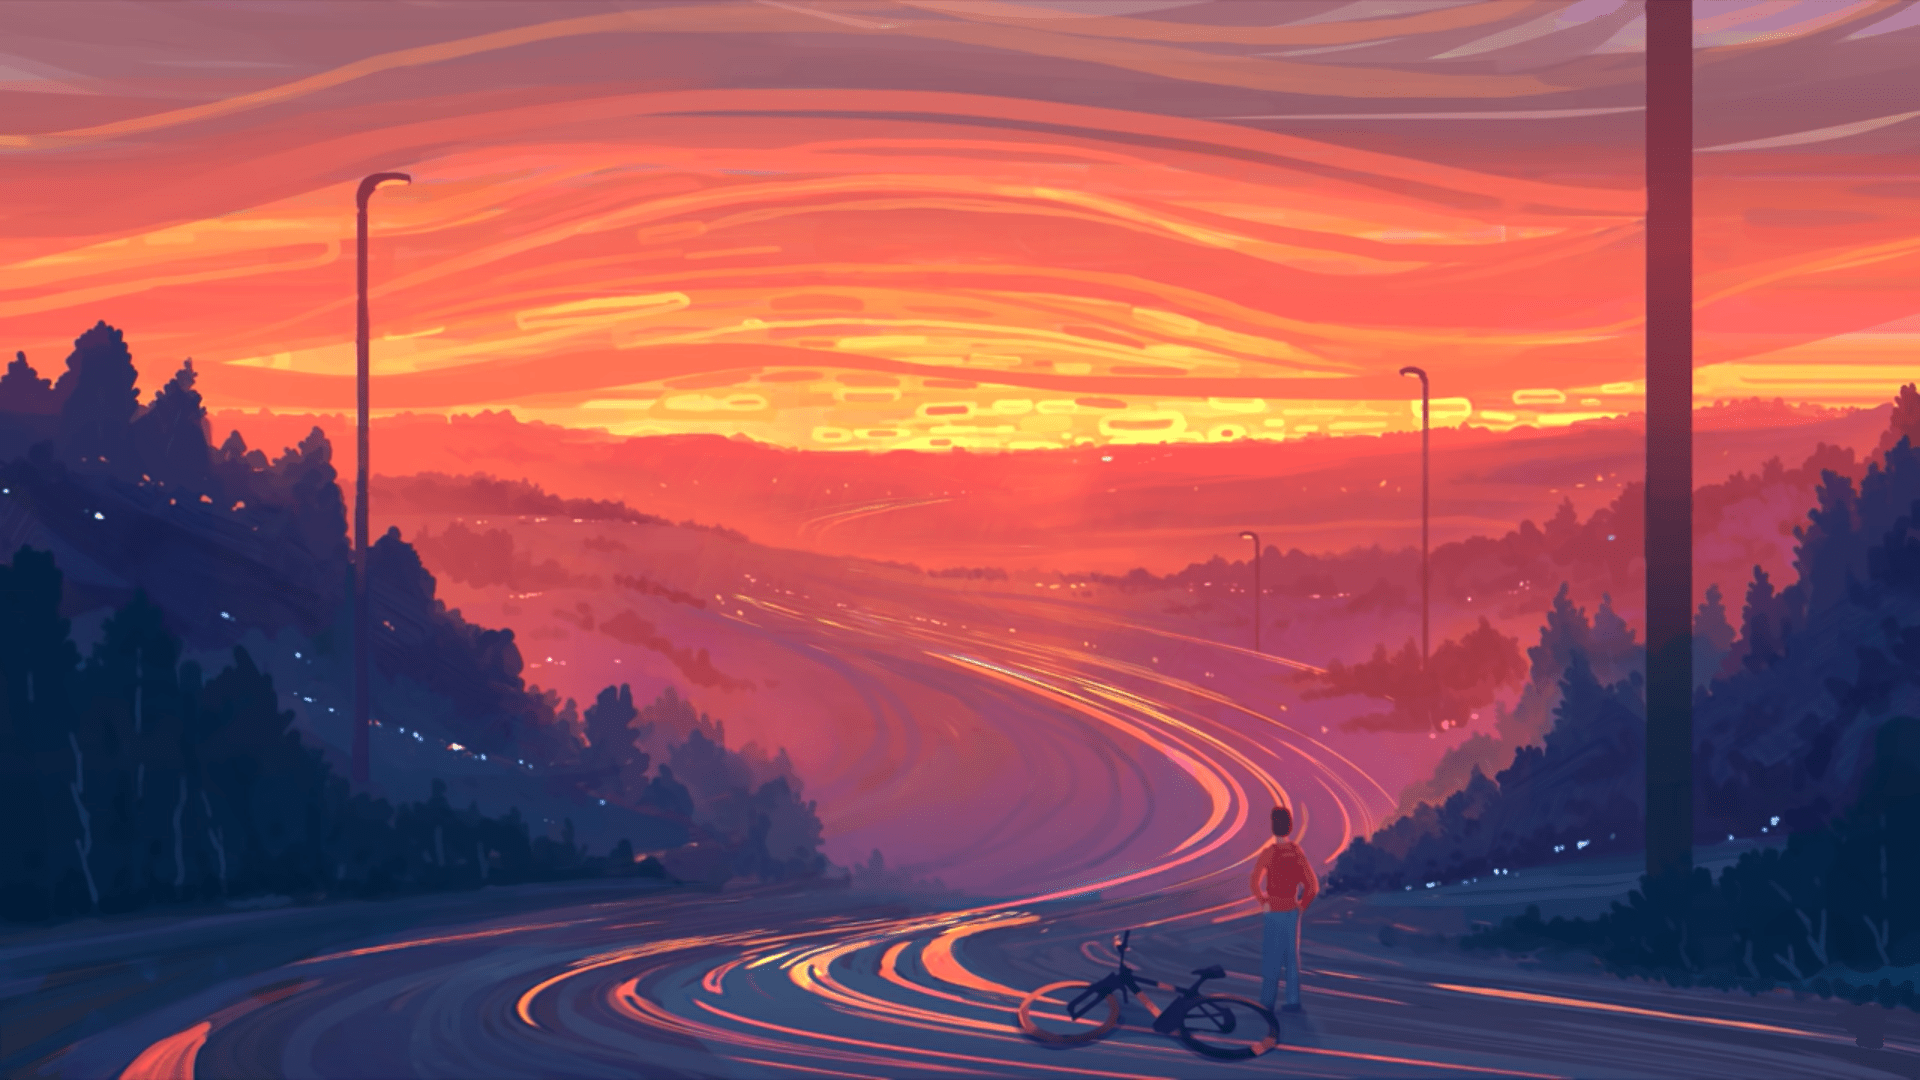 Sunset In A Valley Aesthetic Wallpaper [1920 X 1080]